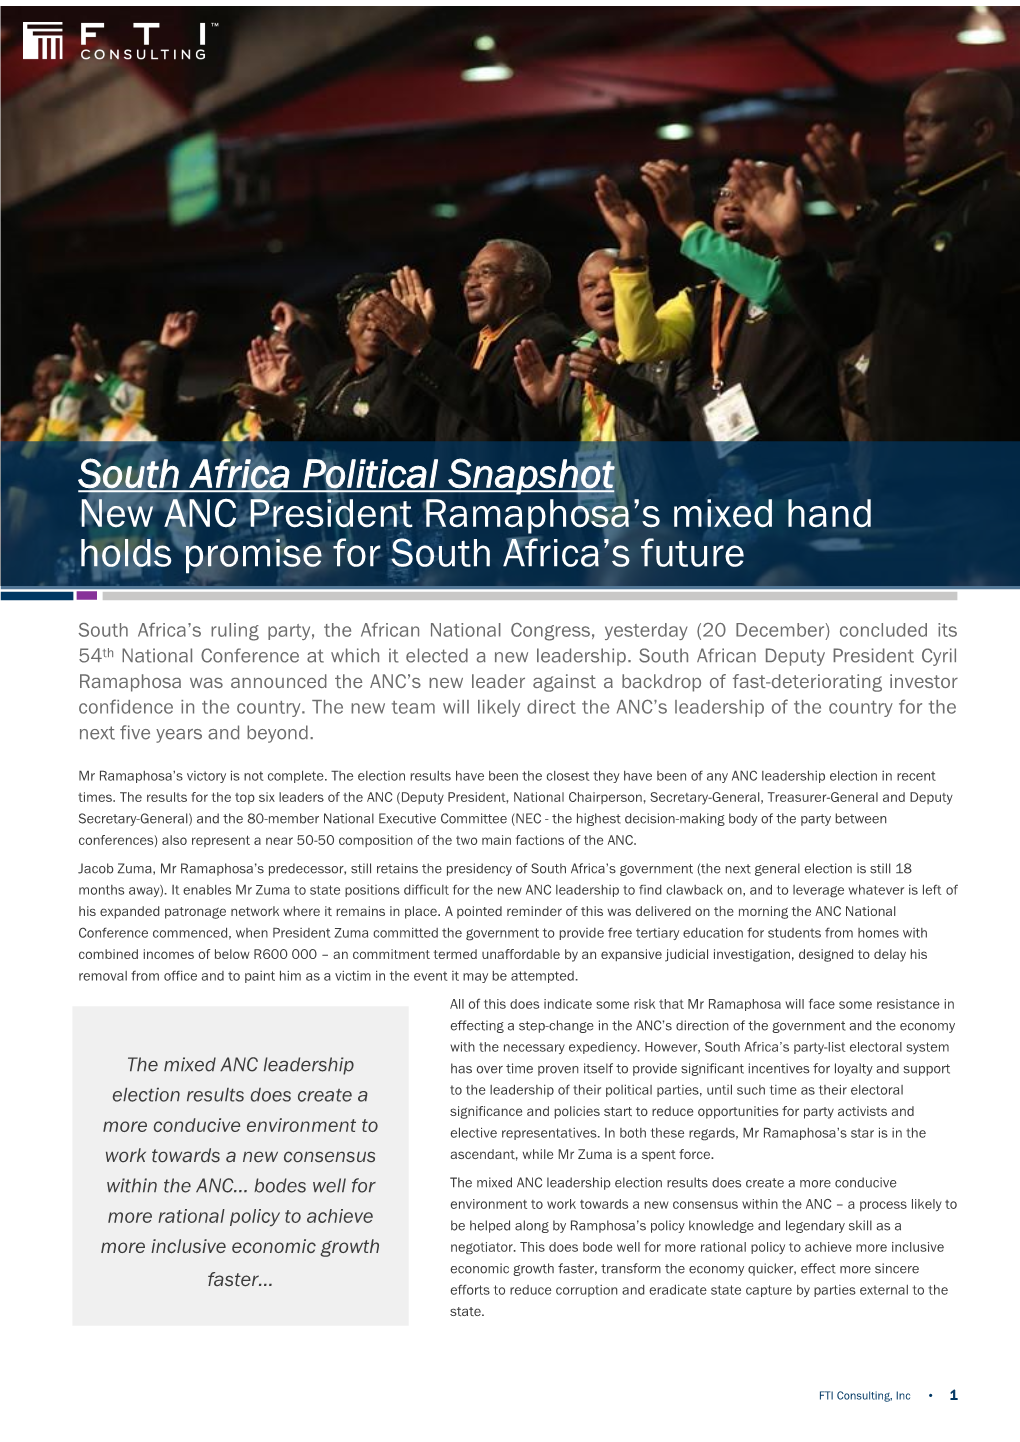 South Africa Political Snapshot New ANC President Ramaphosa's Mixed